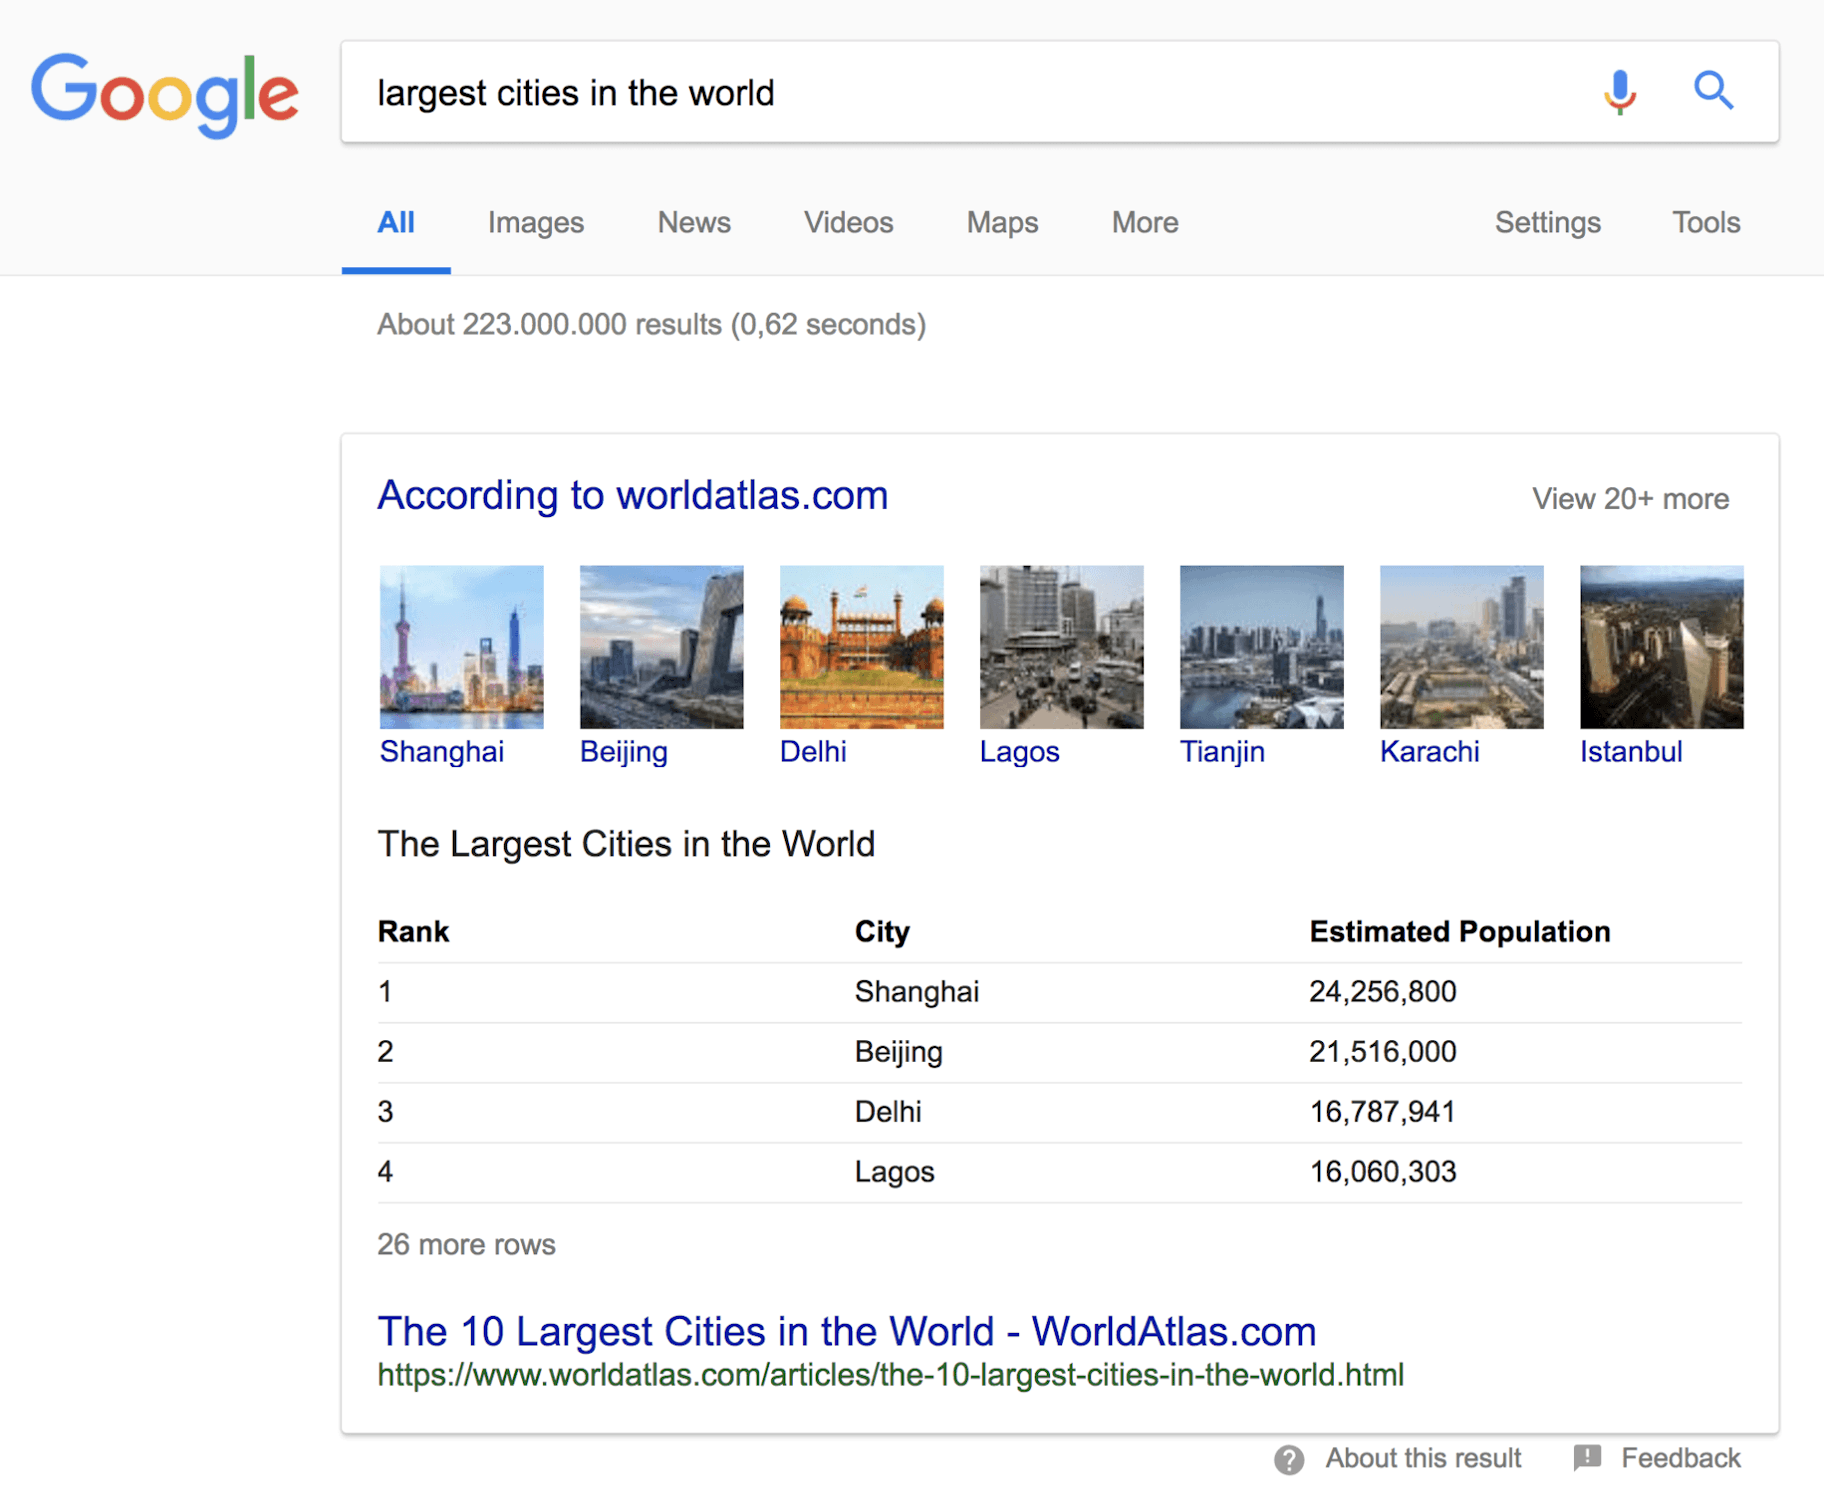 Table Featured Snippet